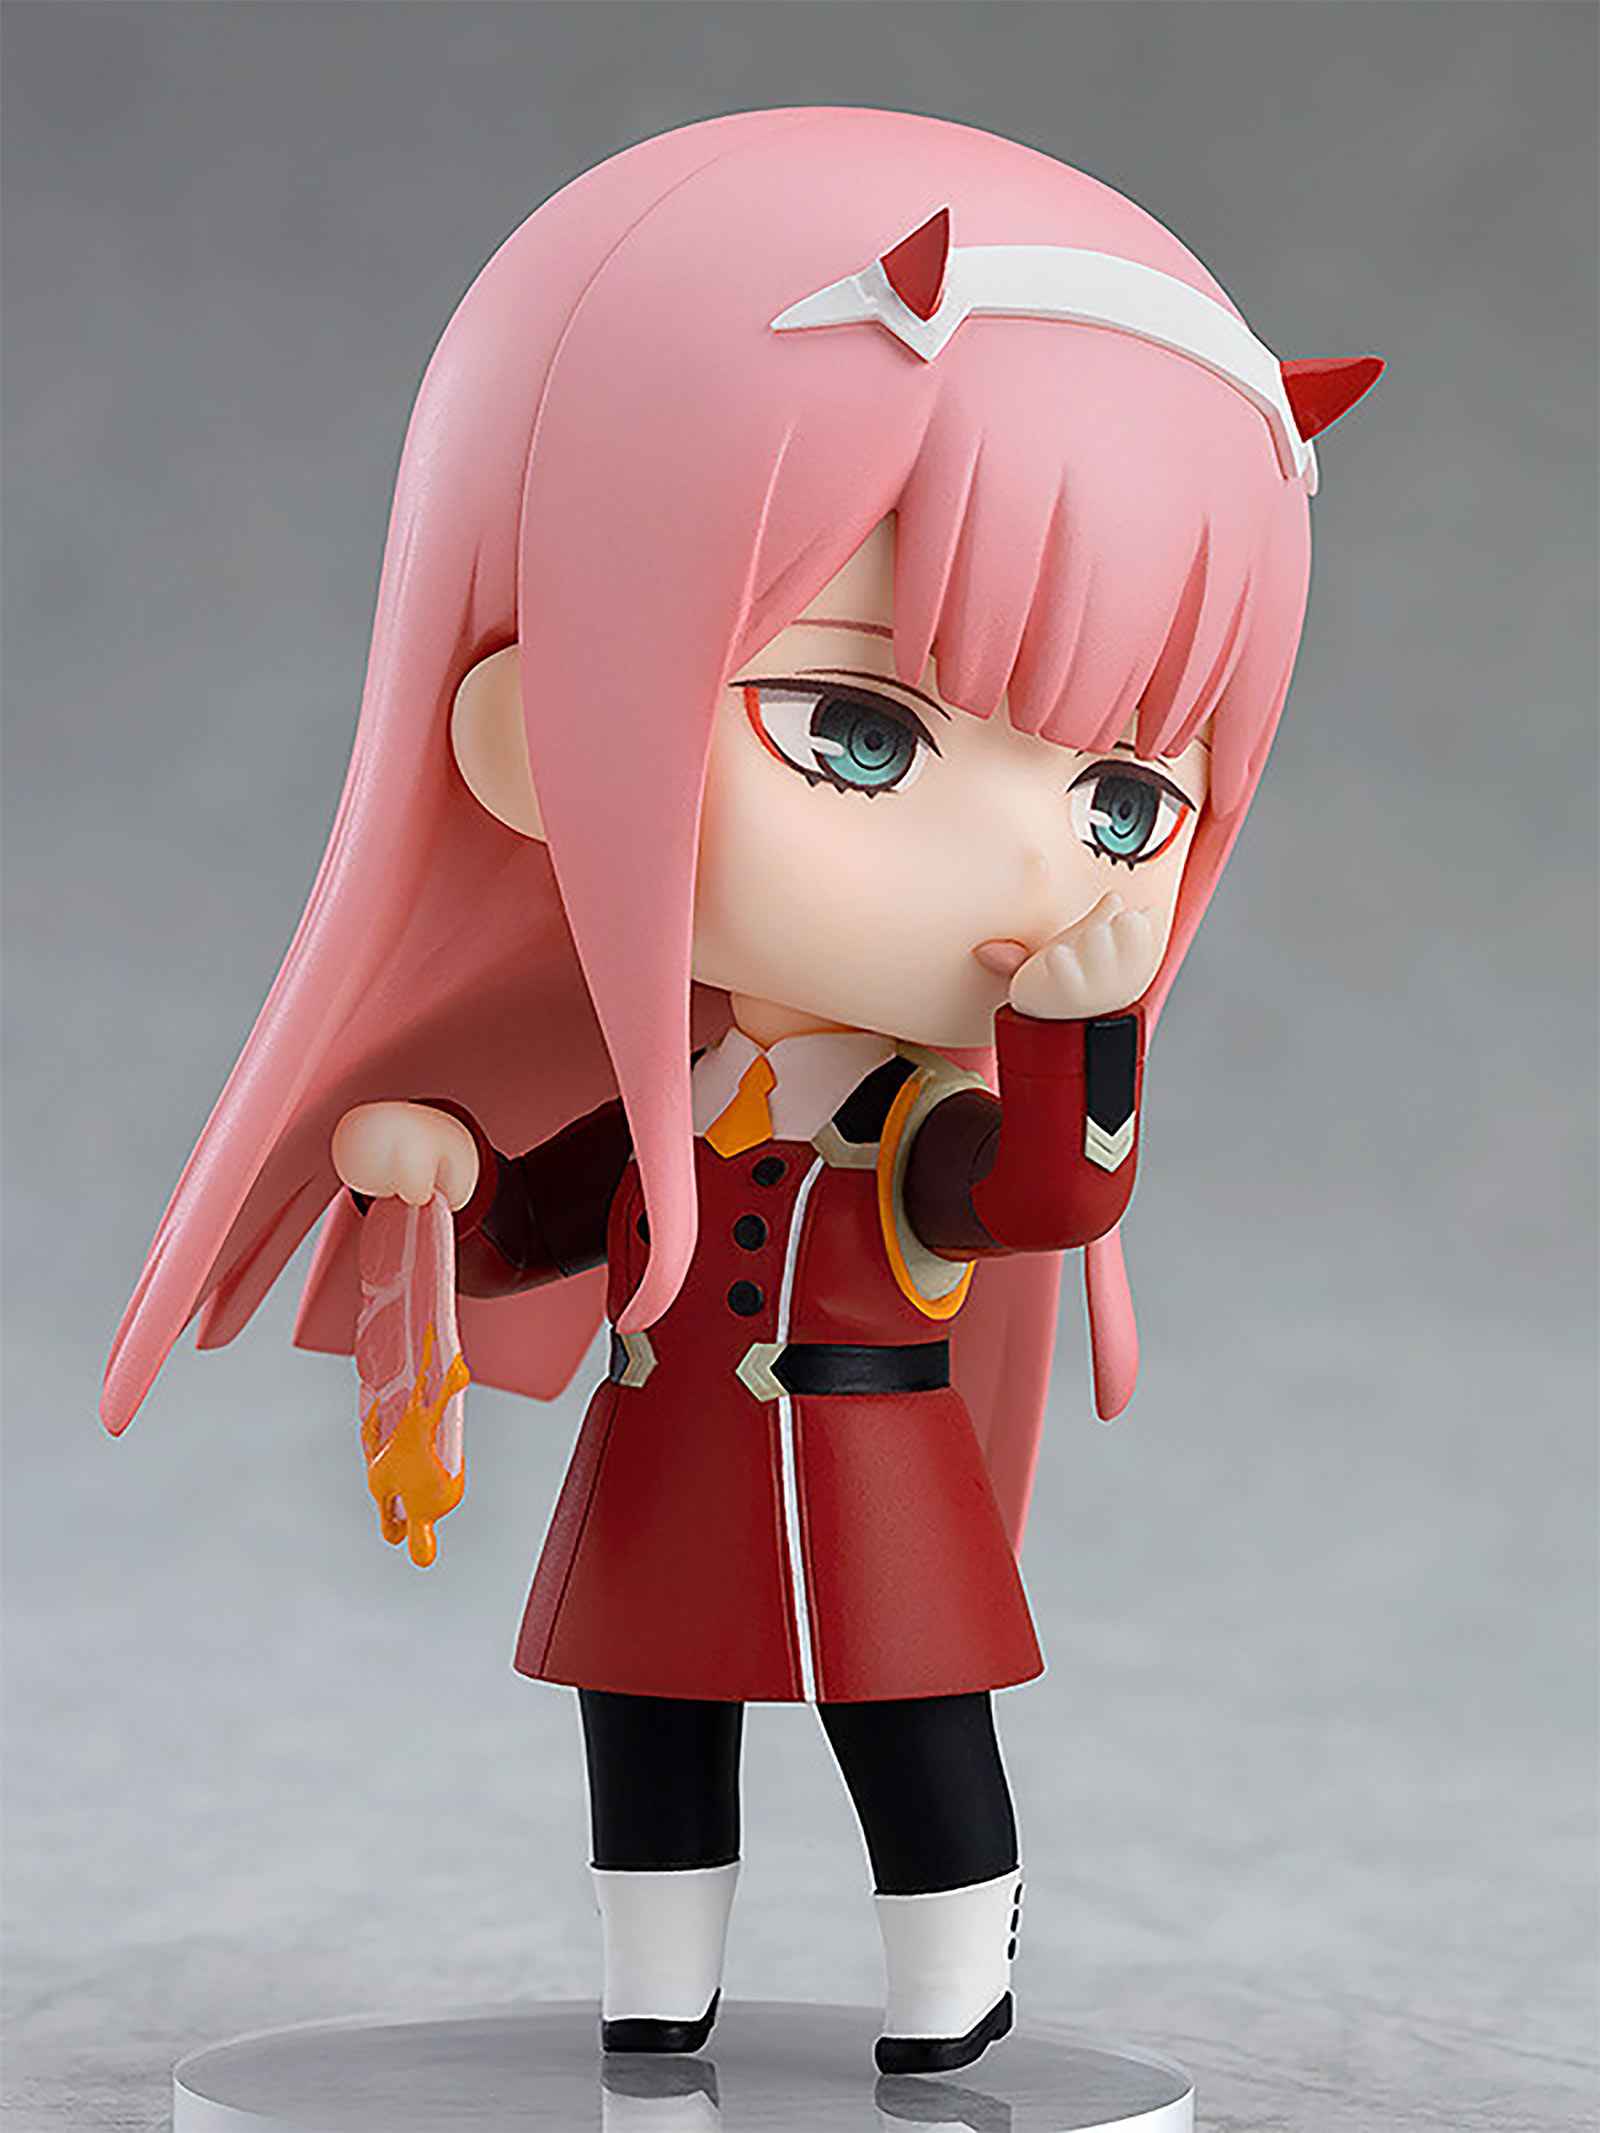 DARLING in the FRANXX - Zero Two Nendoroid Action Figure